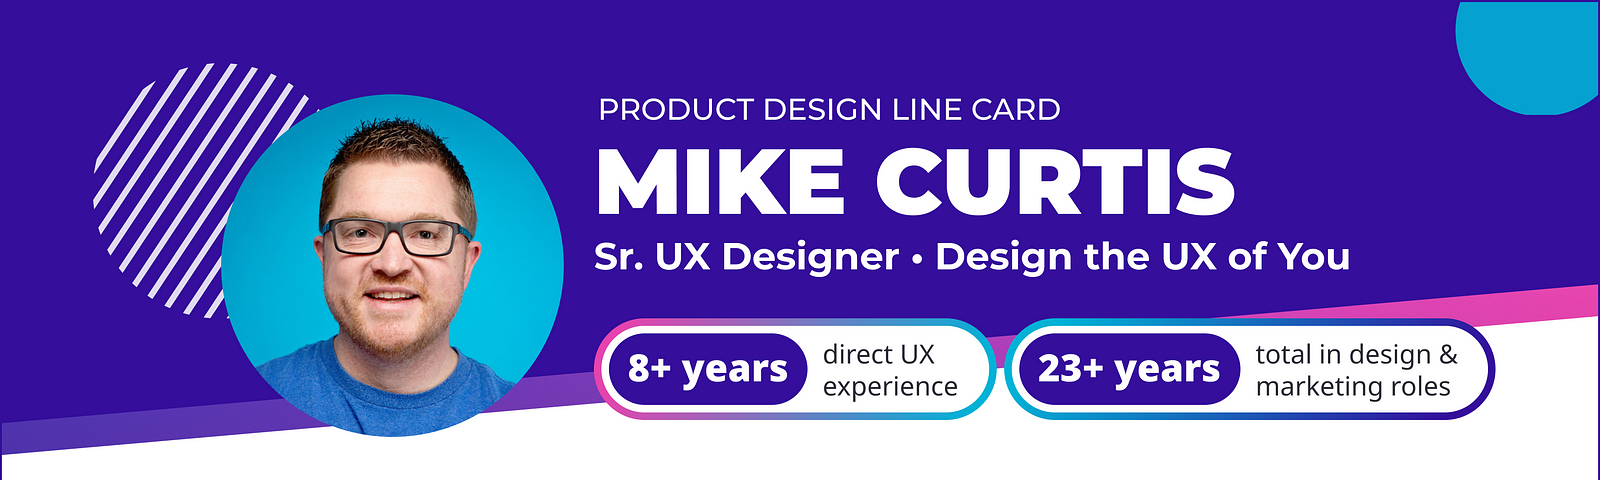 Product Design Line Card for Mike Curtis | Image by Author